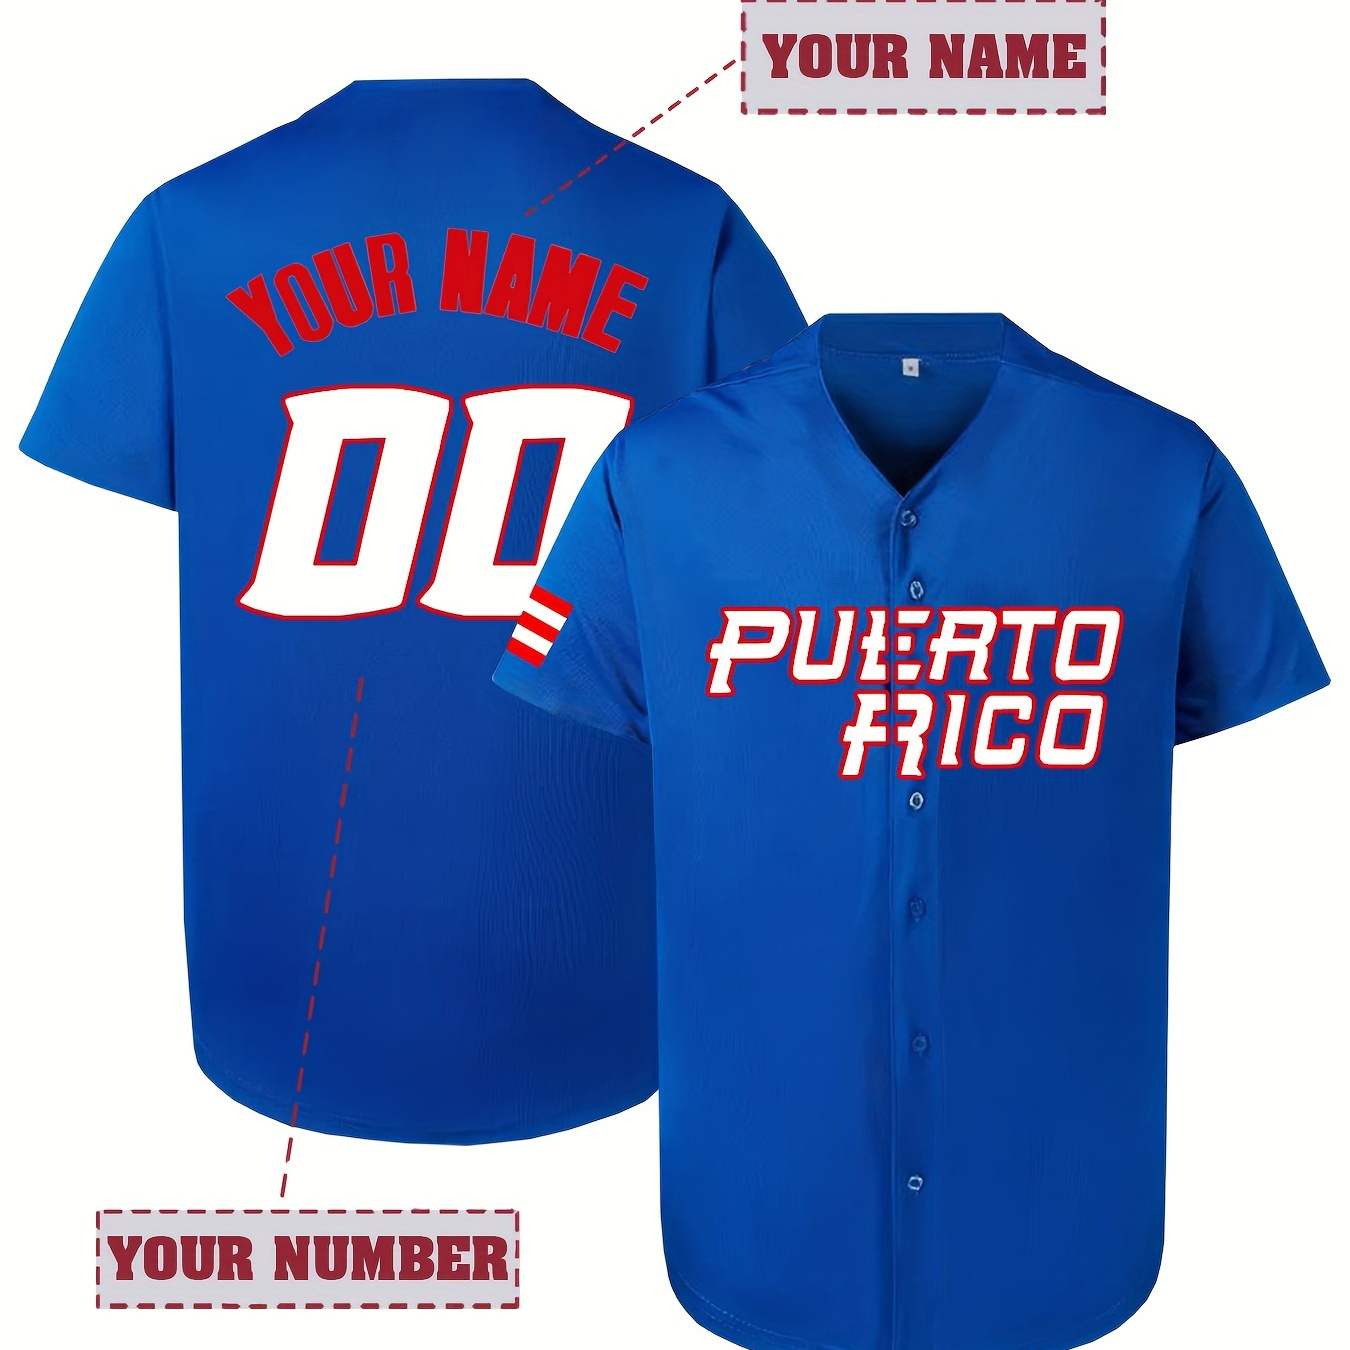 

Puerto Rico Baseball Jersey, Personalized Men's V-neck Short Sleeve Sports Shirt, Customized Name And Number Embroidery, Loose Breathable Team Training Uniform